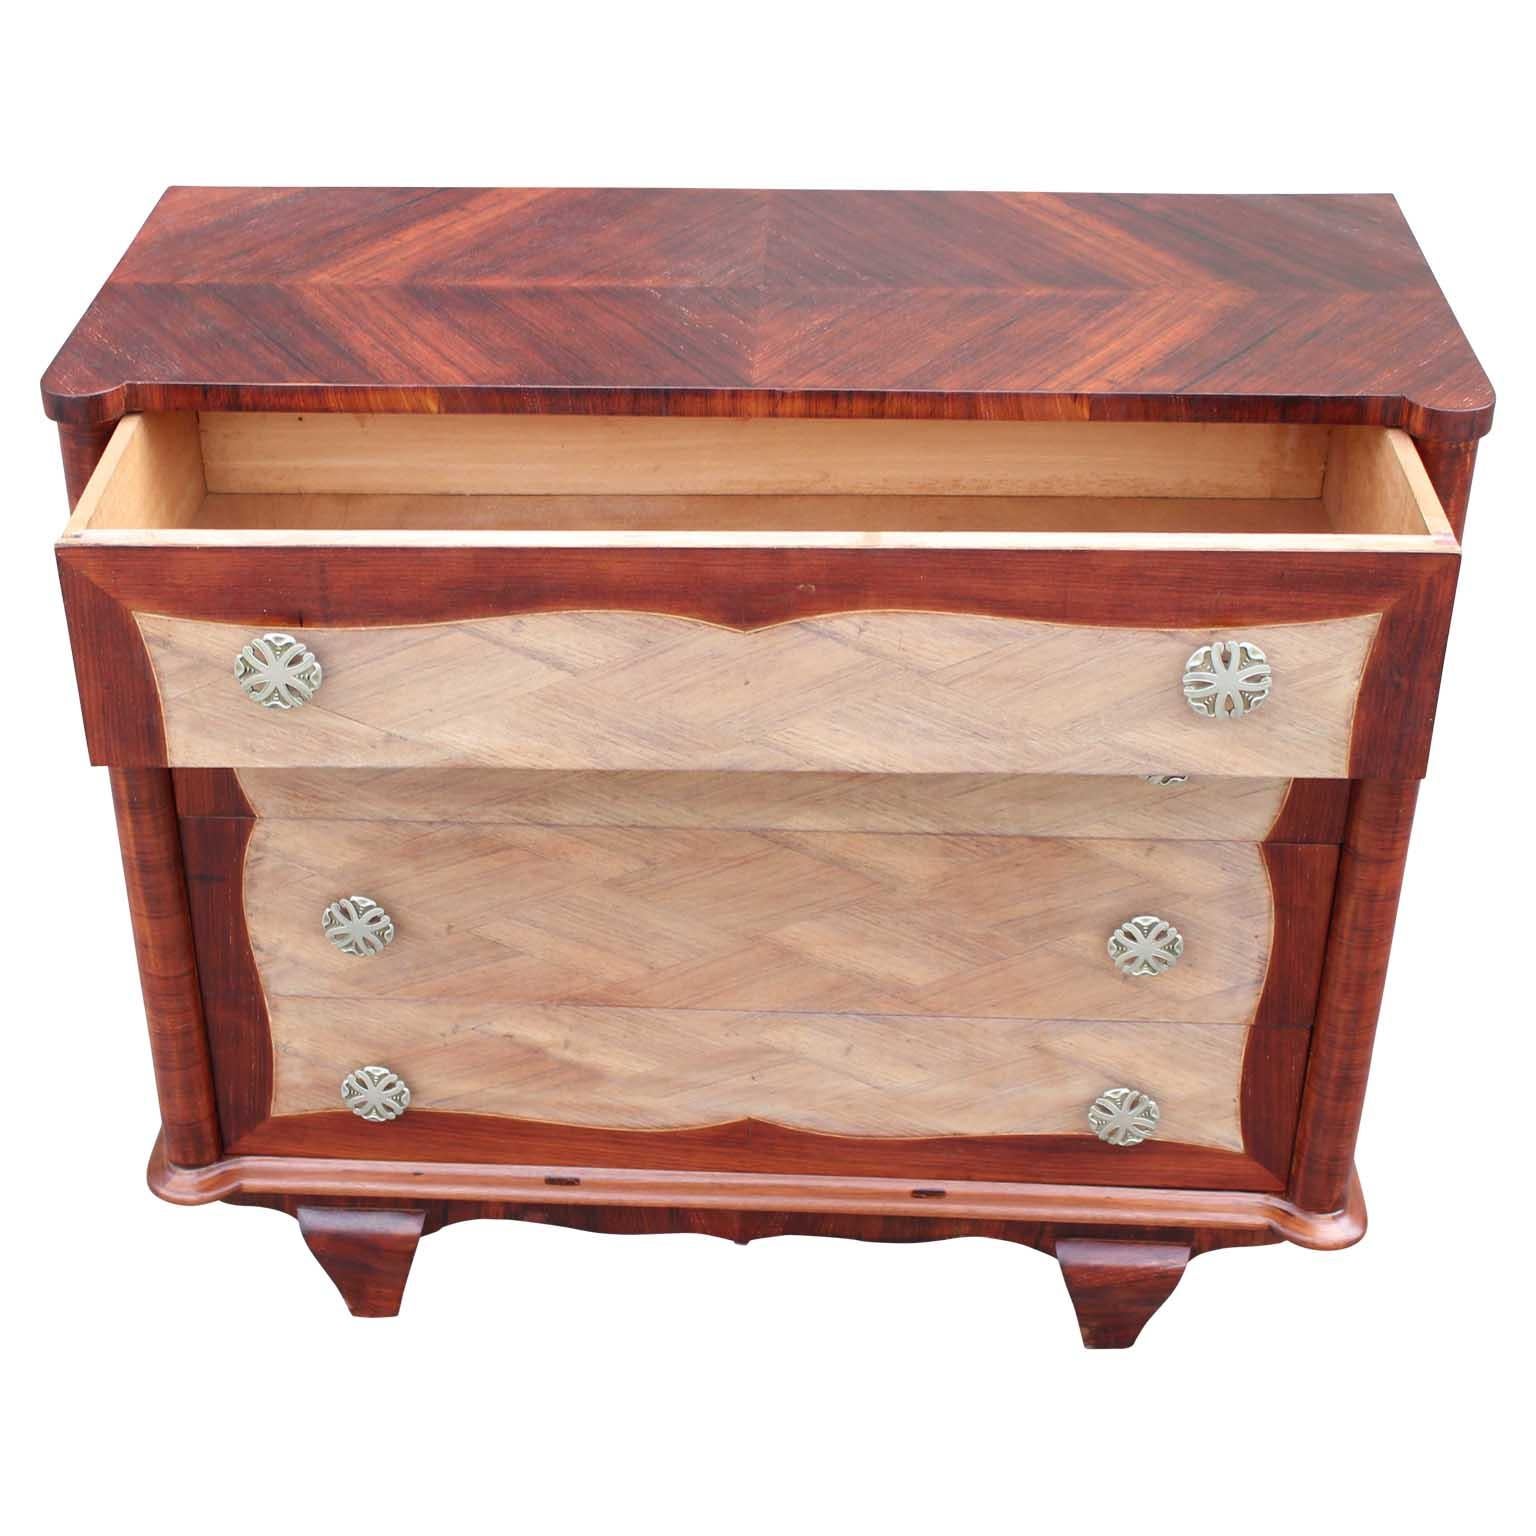 Mid-20th Century Modern Four-Drawer Italian Parquetry Restored Rosewood Chest